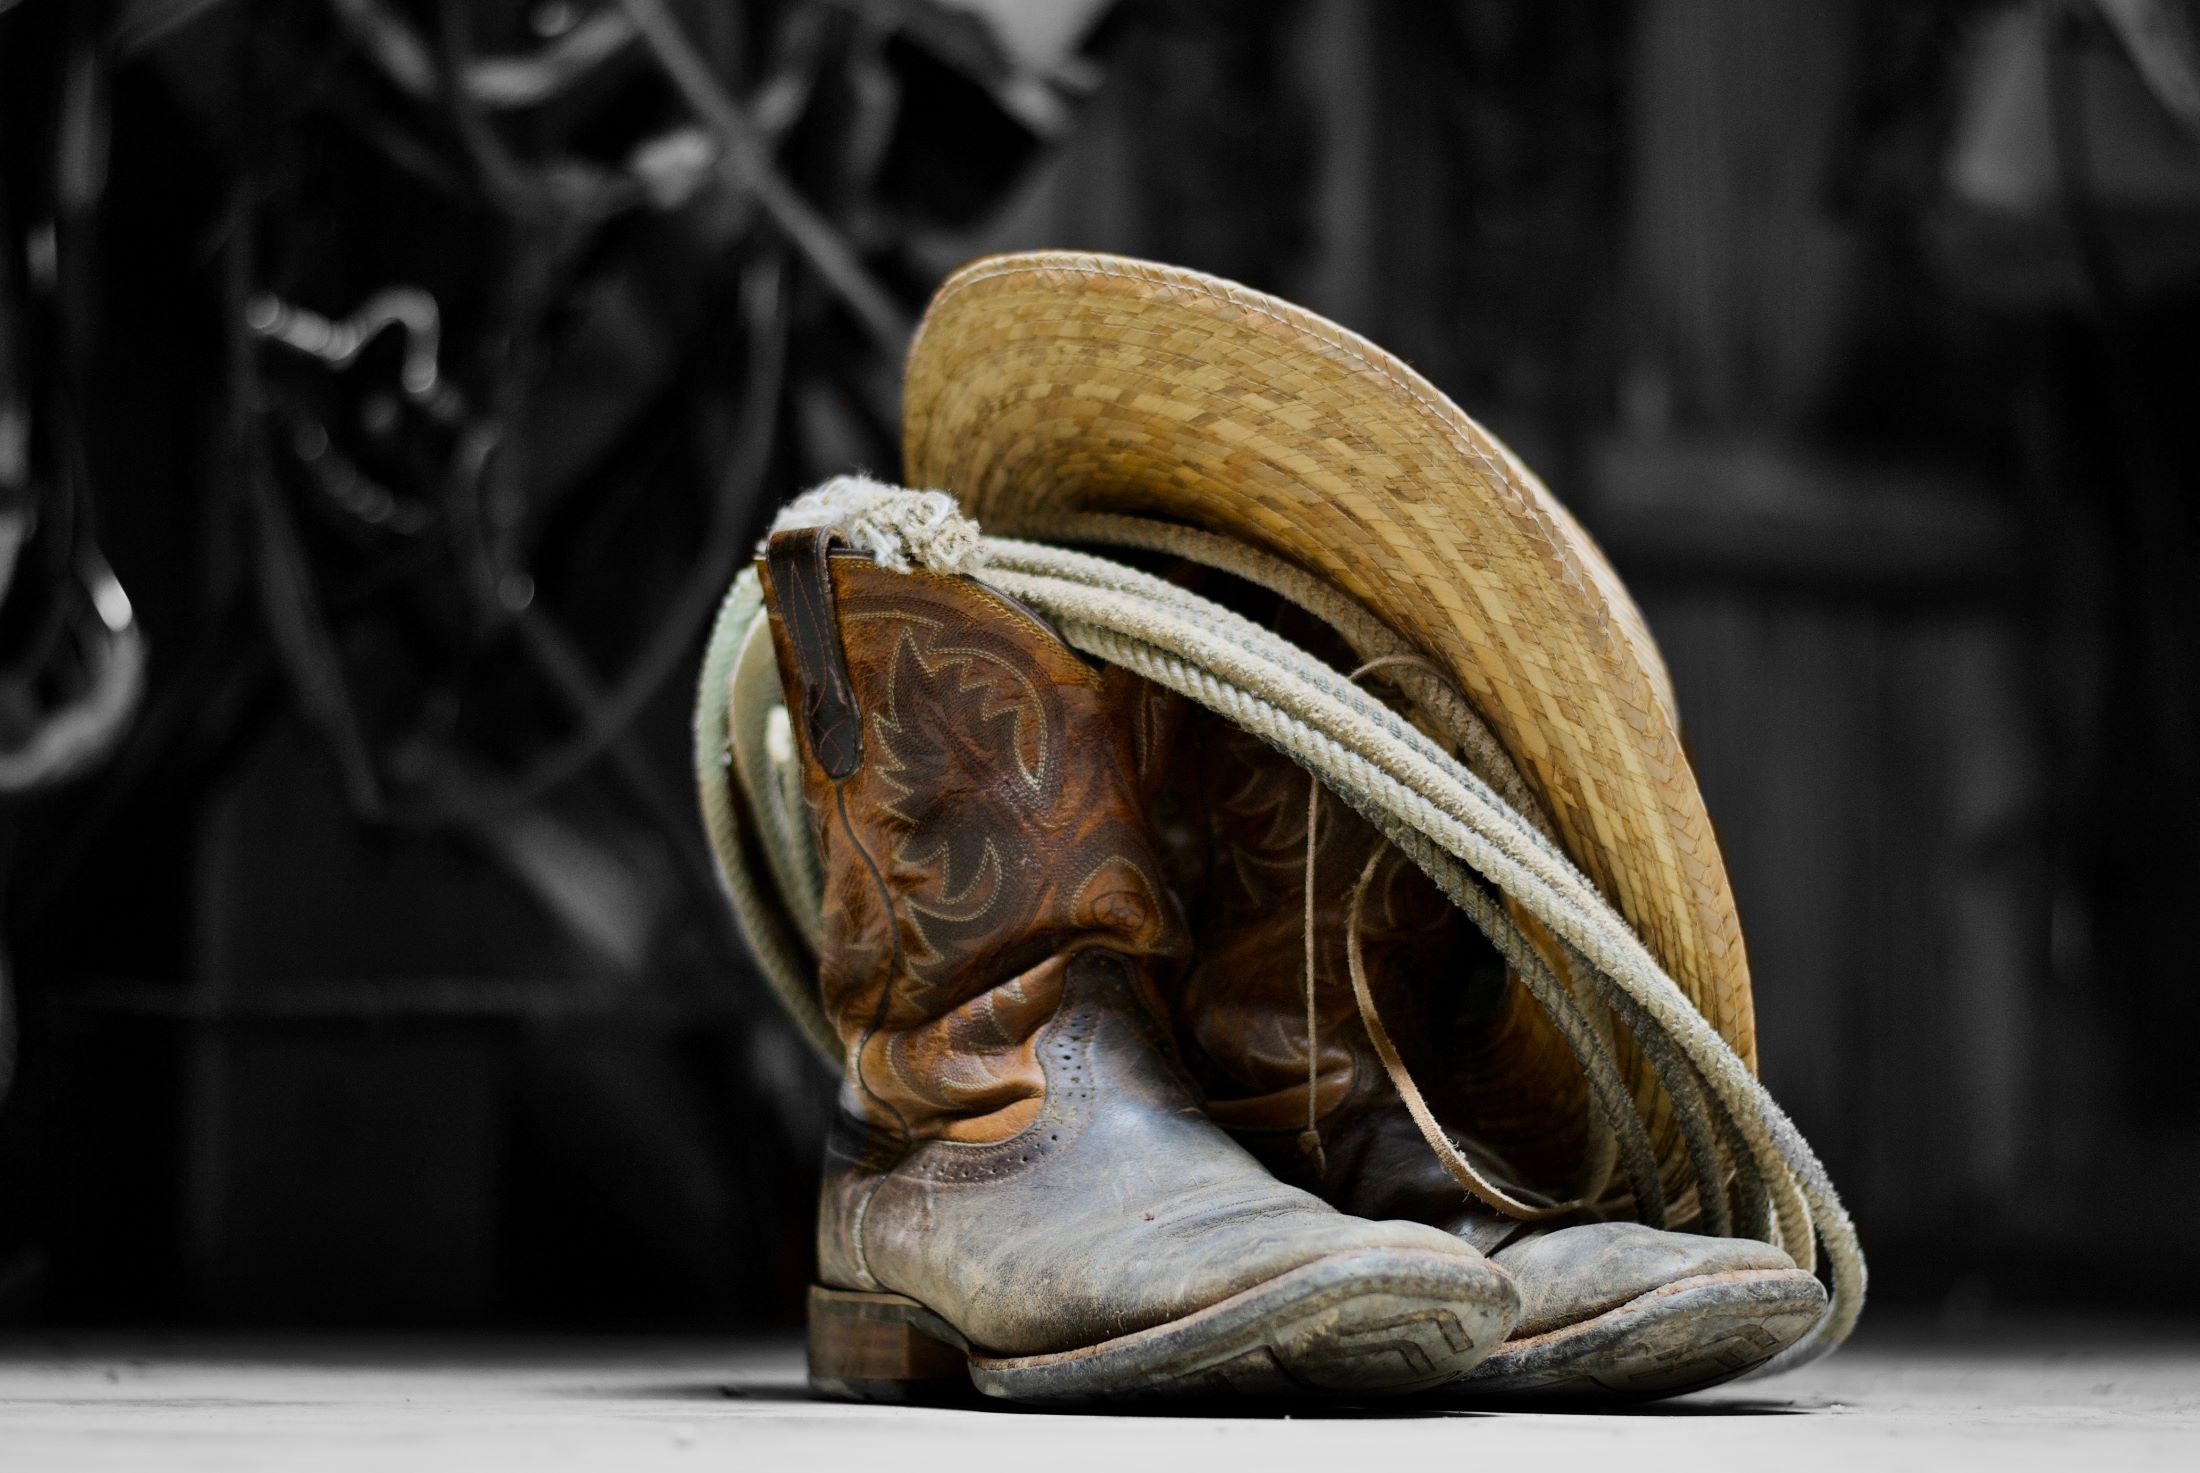 An image of cowboy boots, a vowboy hat, and a rope.